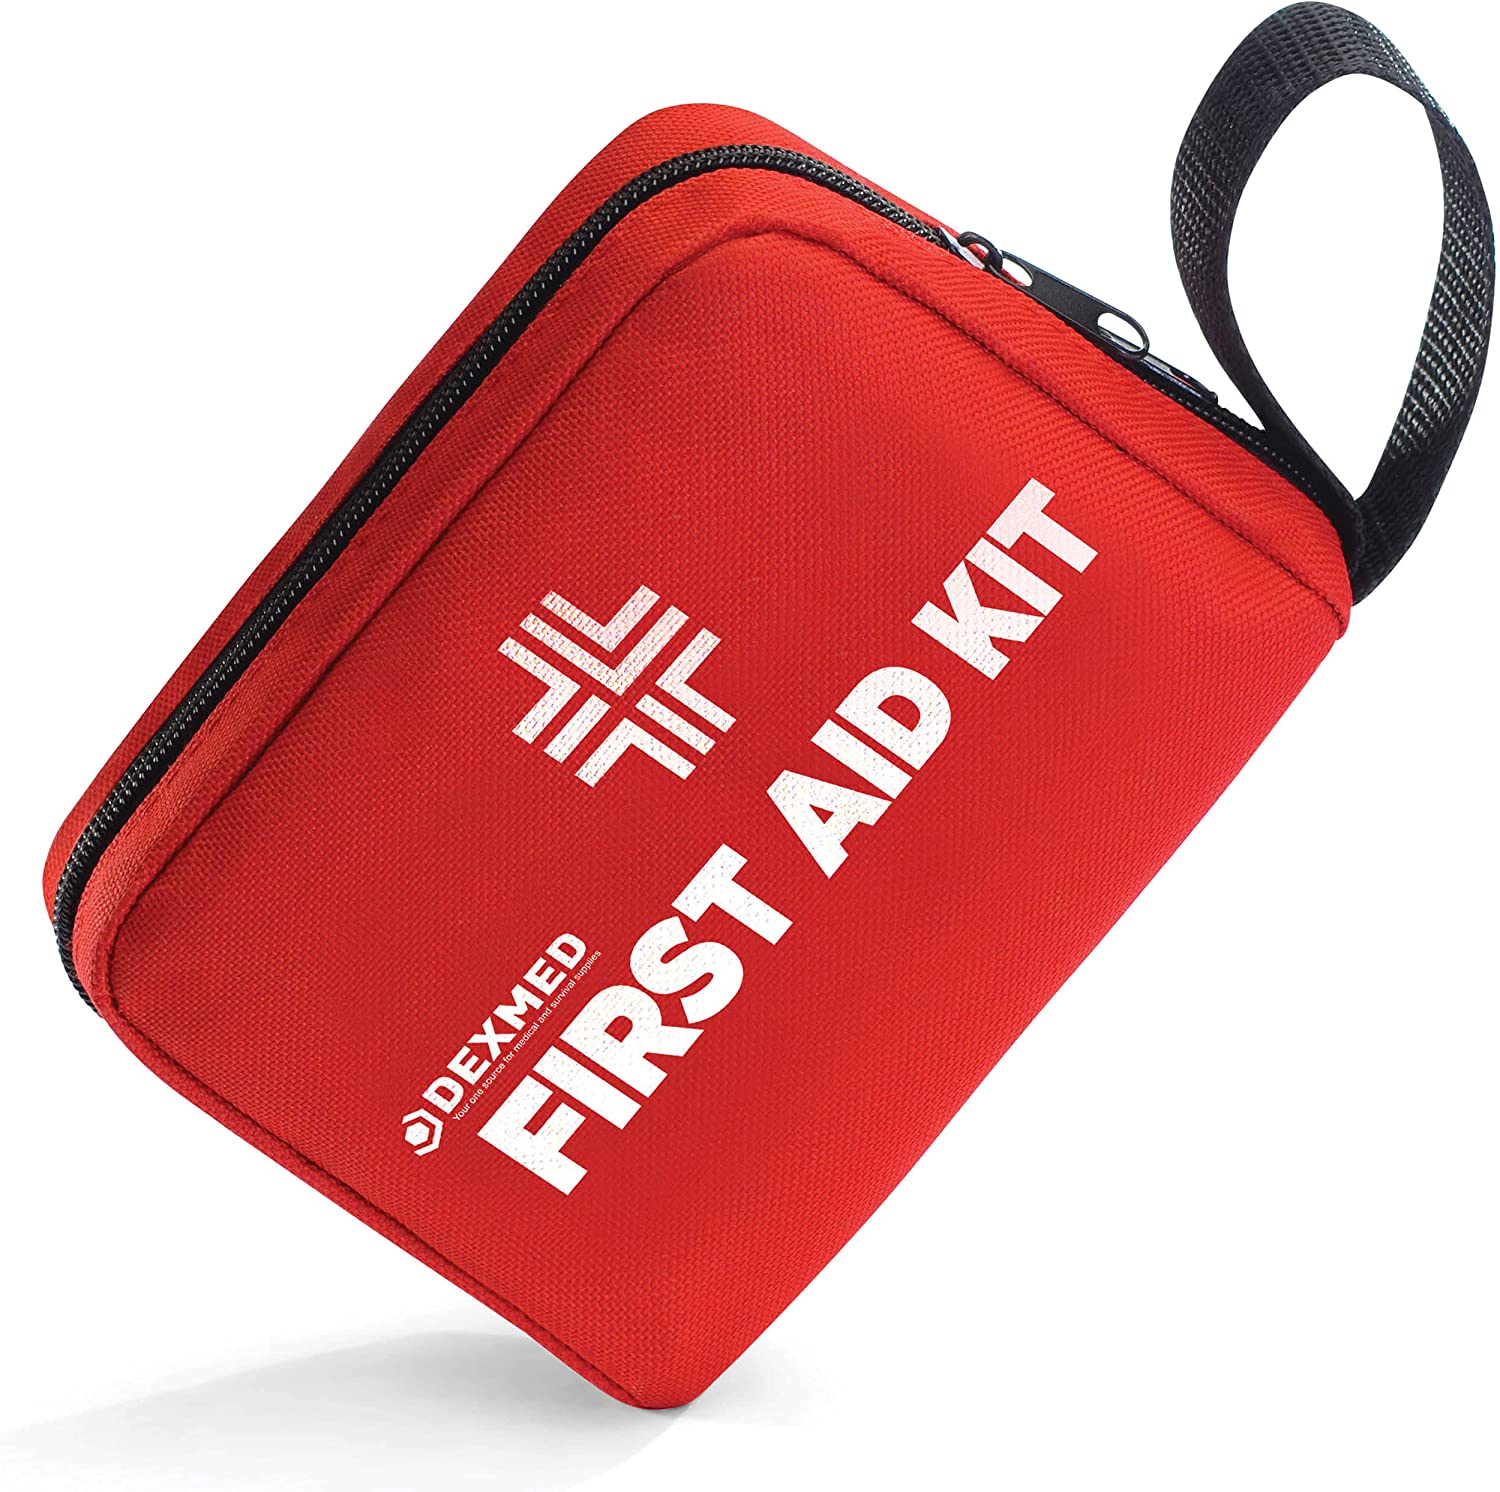 Dexmed Small First Aid Kit with Professional Medical Supplies and Survival Equipment – Lightweight, Waterproof, and Compact Medical Kit for Home, Travel, Camping, Hiking, Car, Office